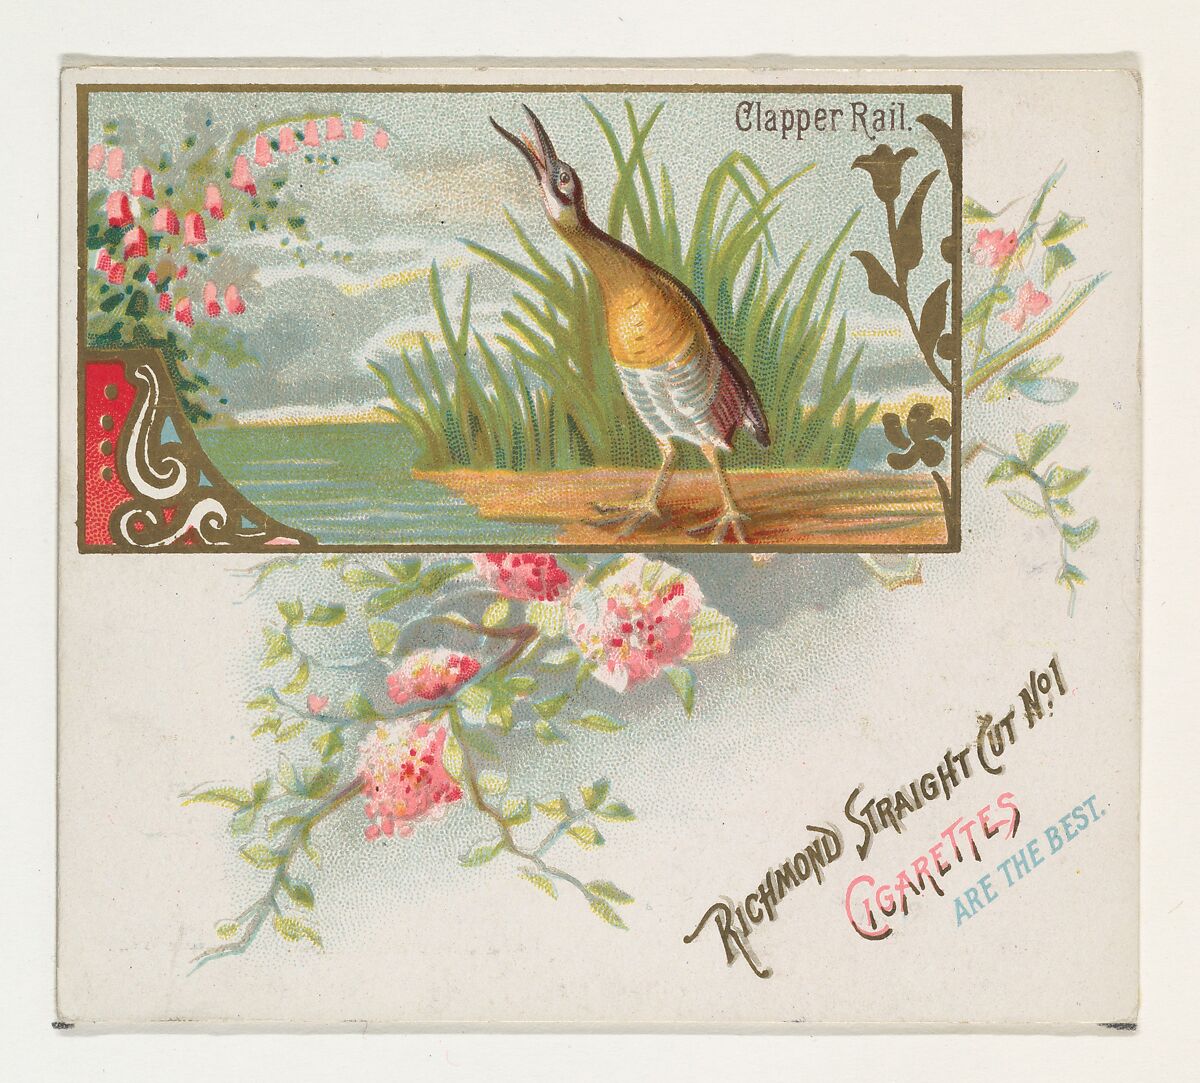 Clapper Rail, from the Game Birds series (N40) for Allen & Ginter Cigarettes, Issued by Allen &amp; Ginter (American, Richmond, Virginia), Commercial color lithograph 